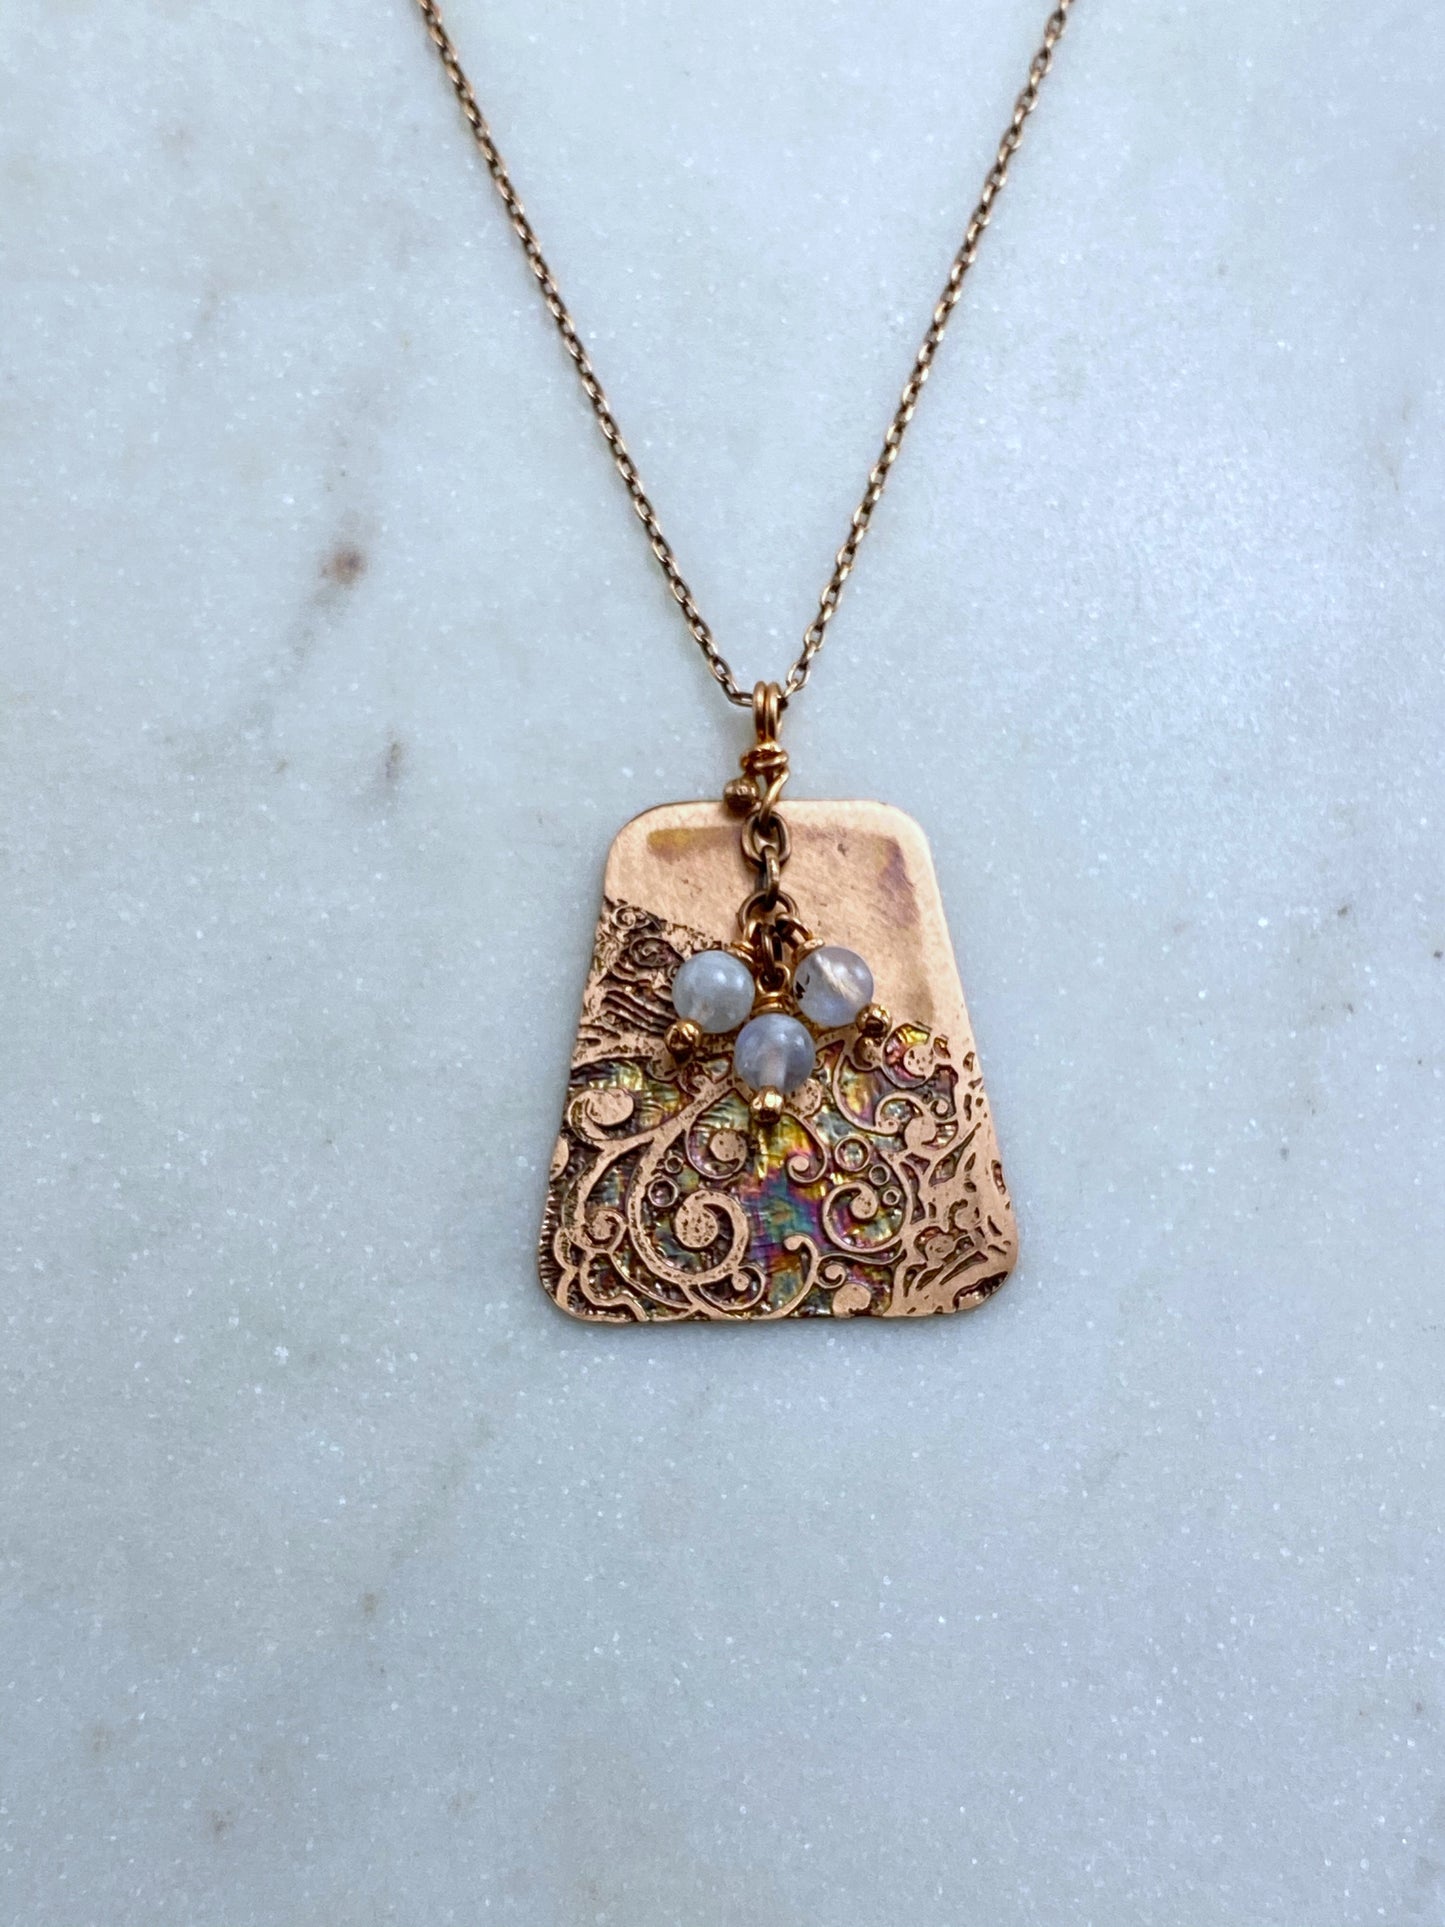 Acid etched copper mandala necklace with moonstone